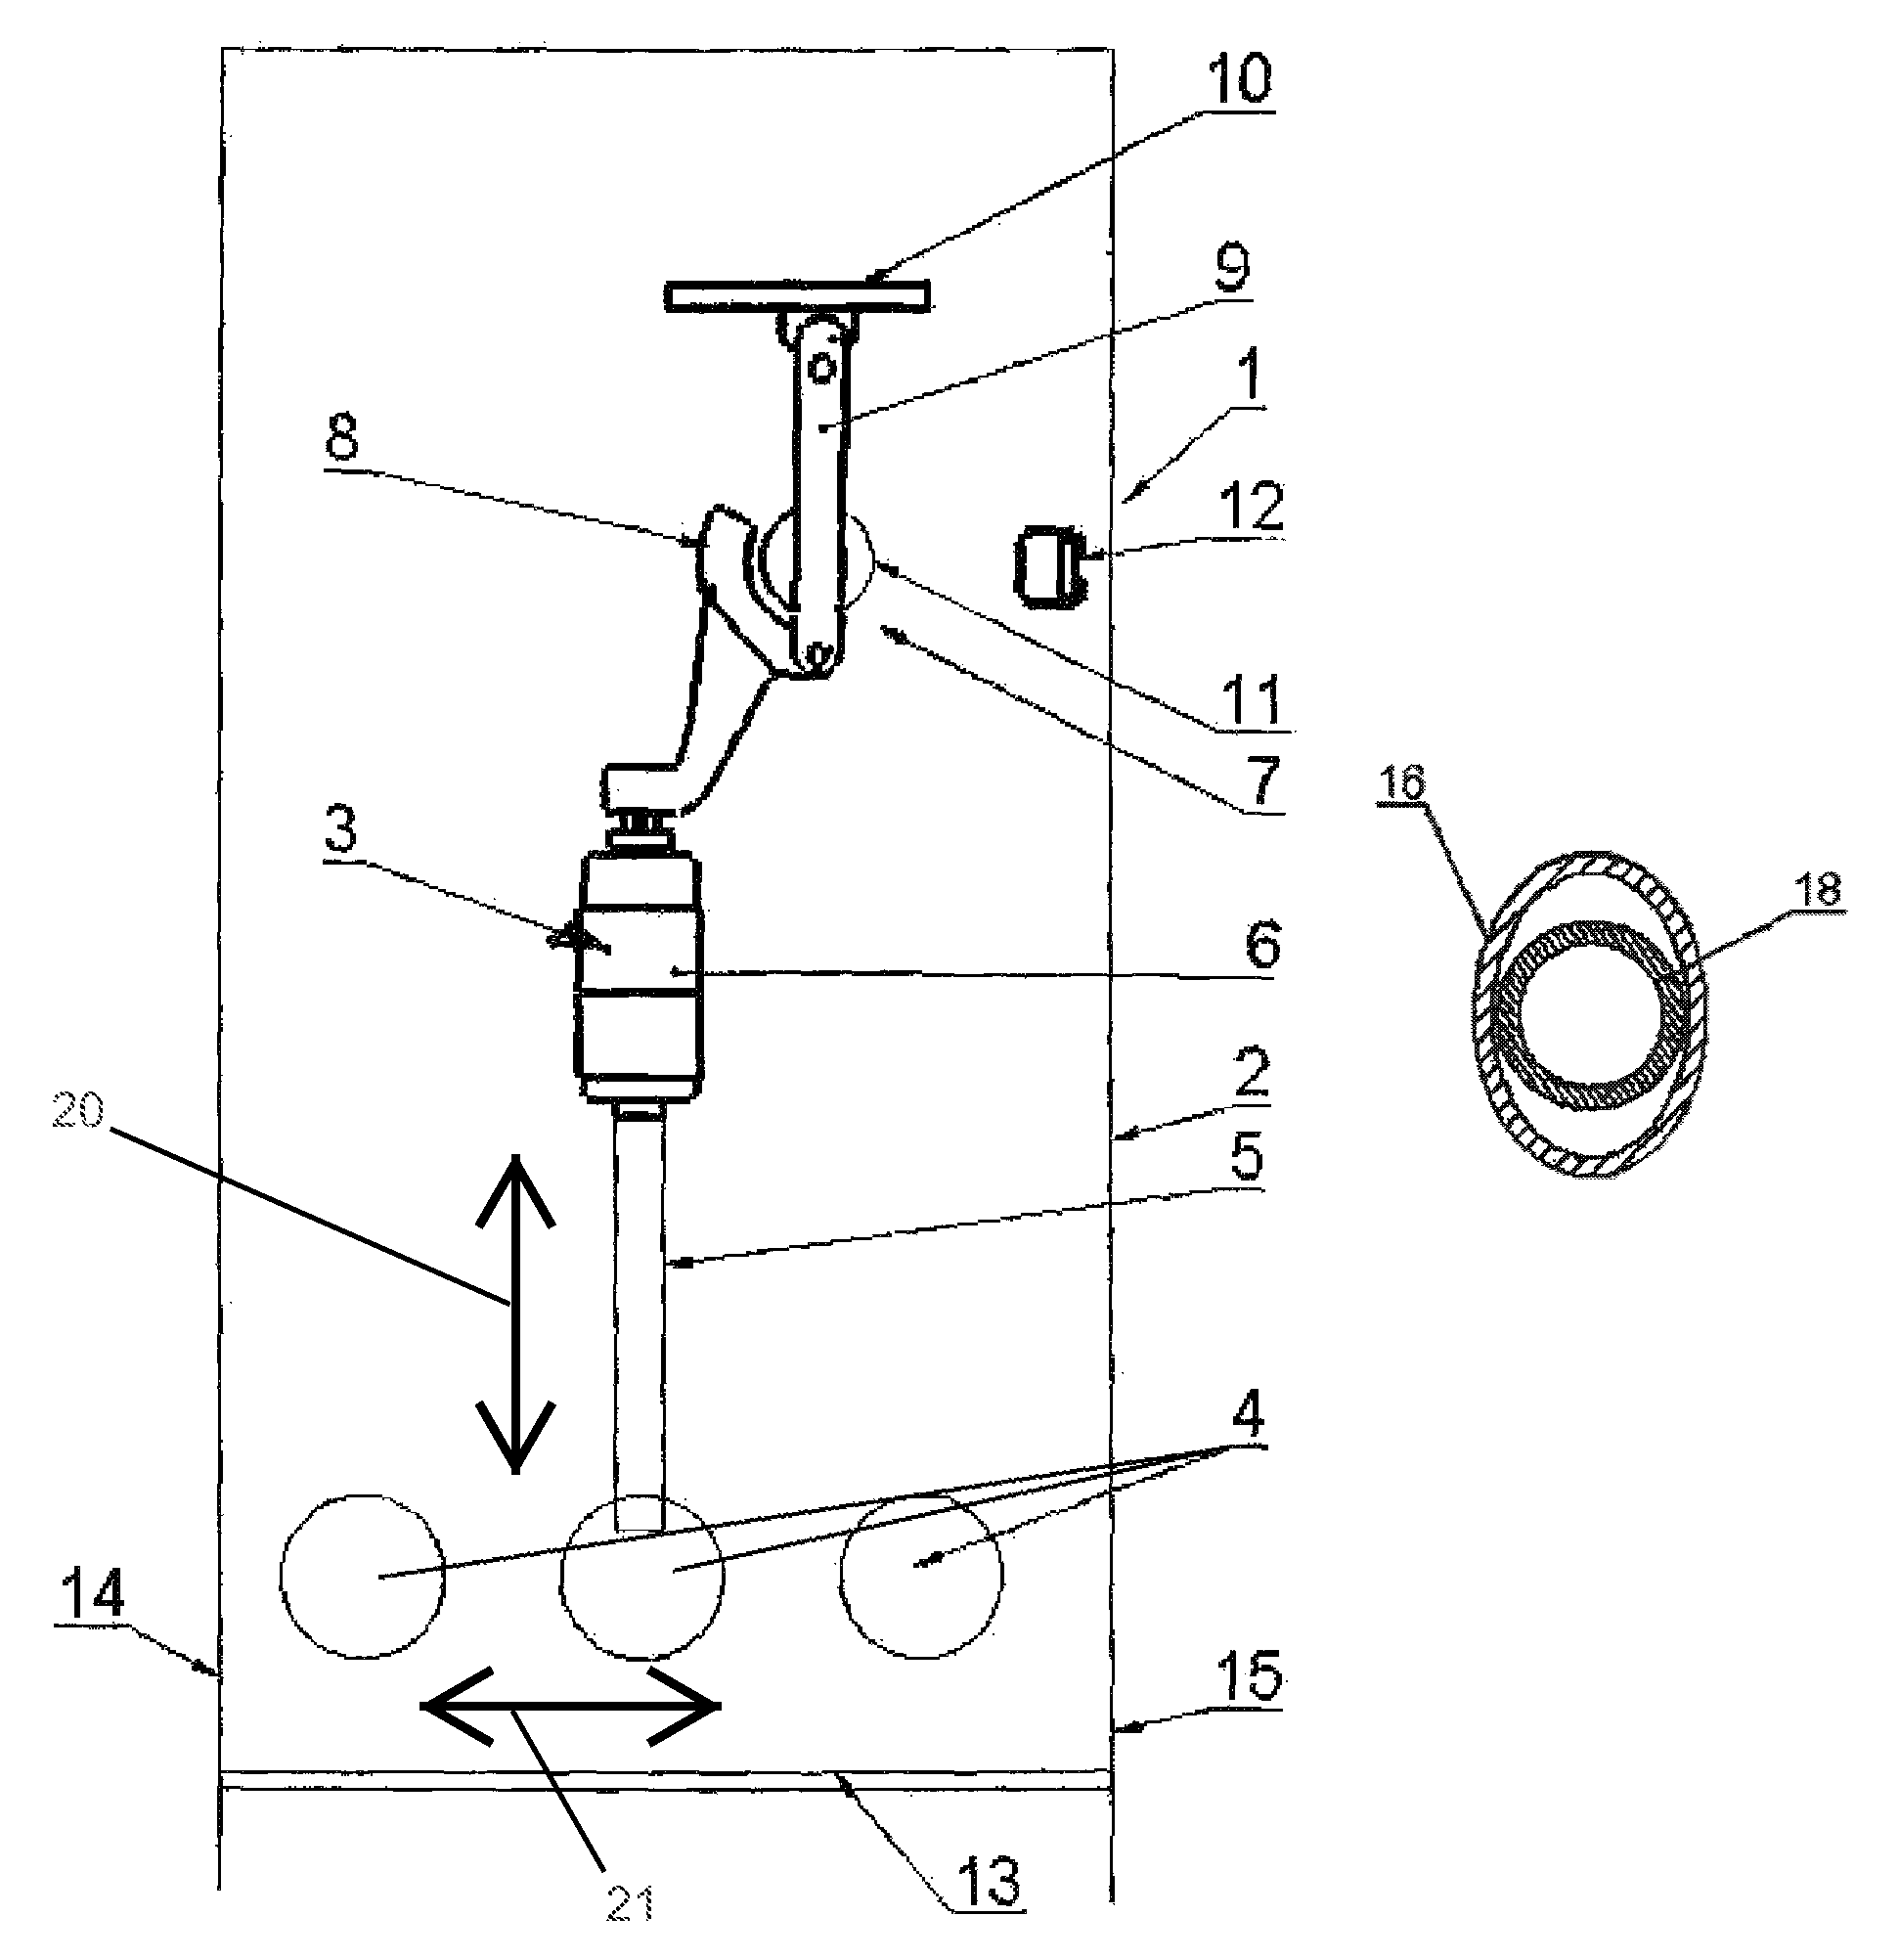 Electric power distribution arrangement and a switchgear provided therewith